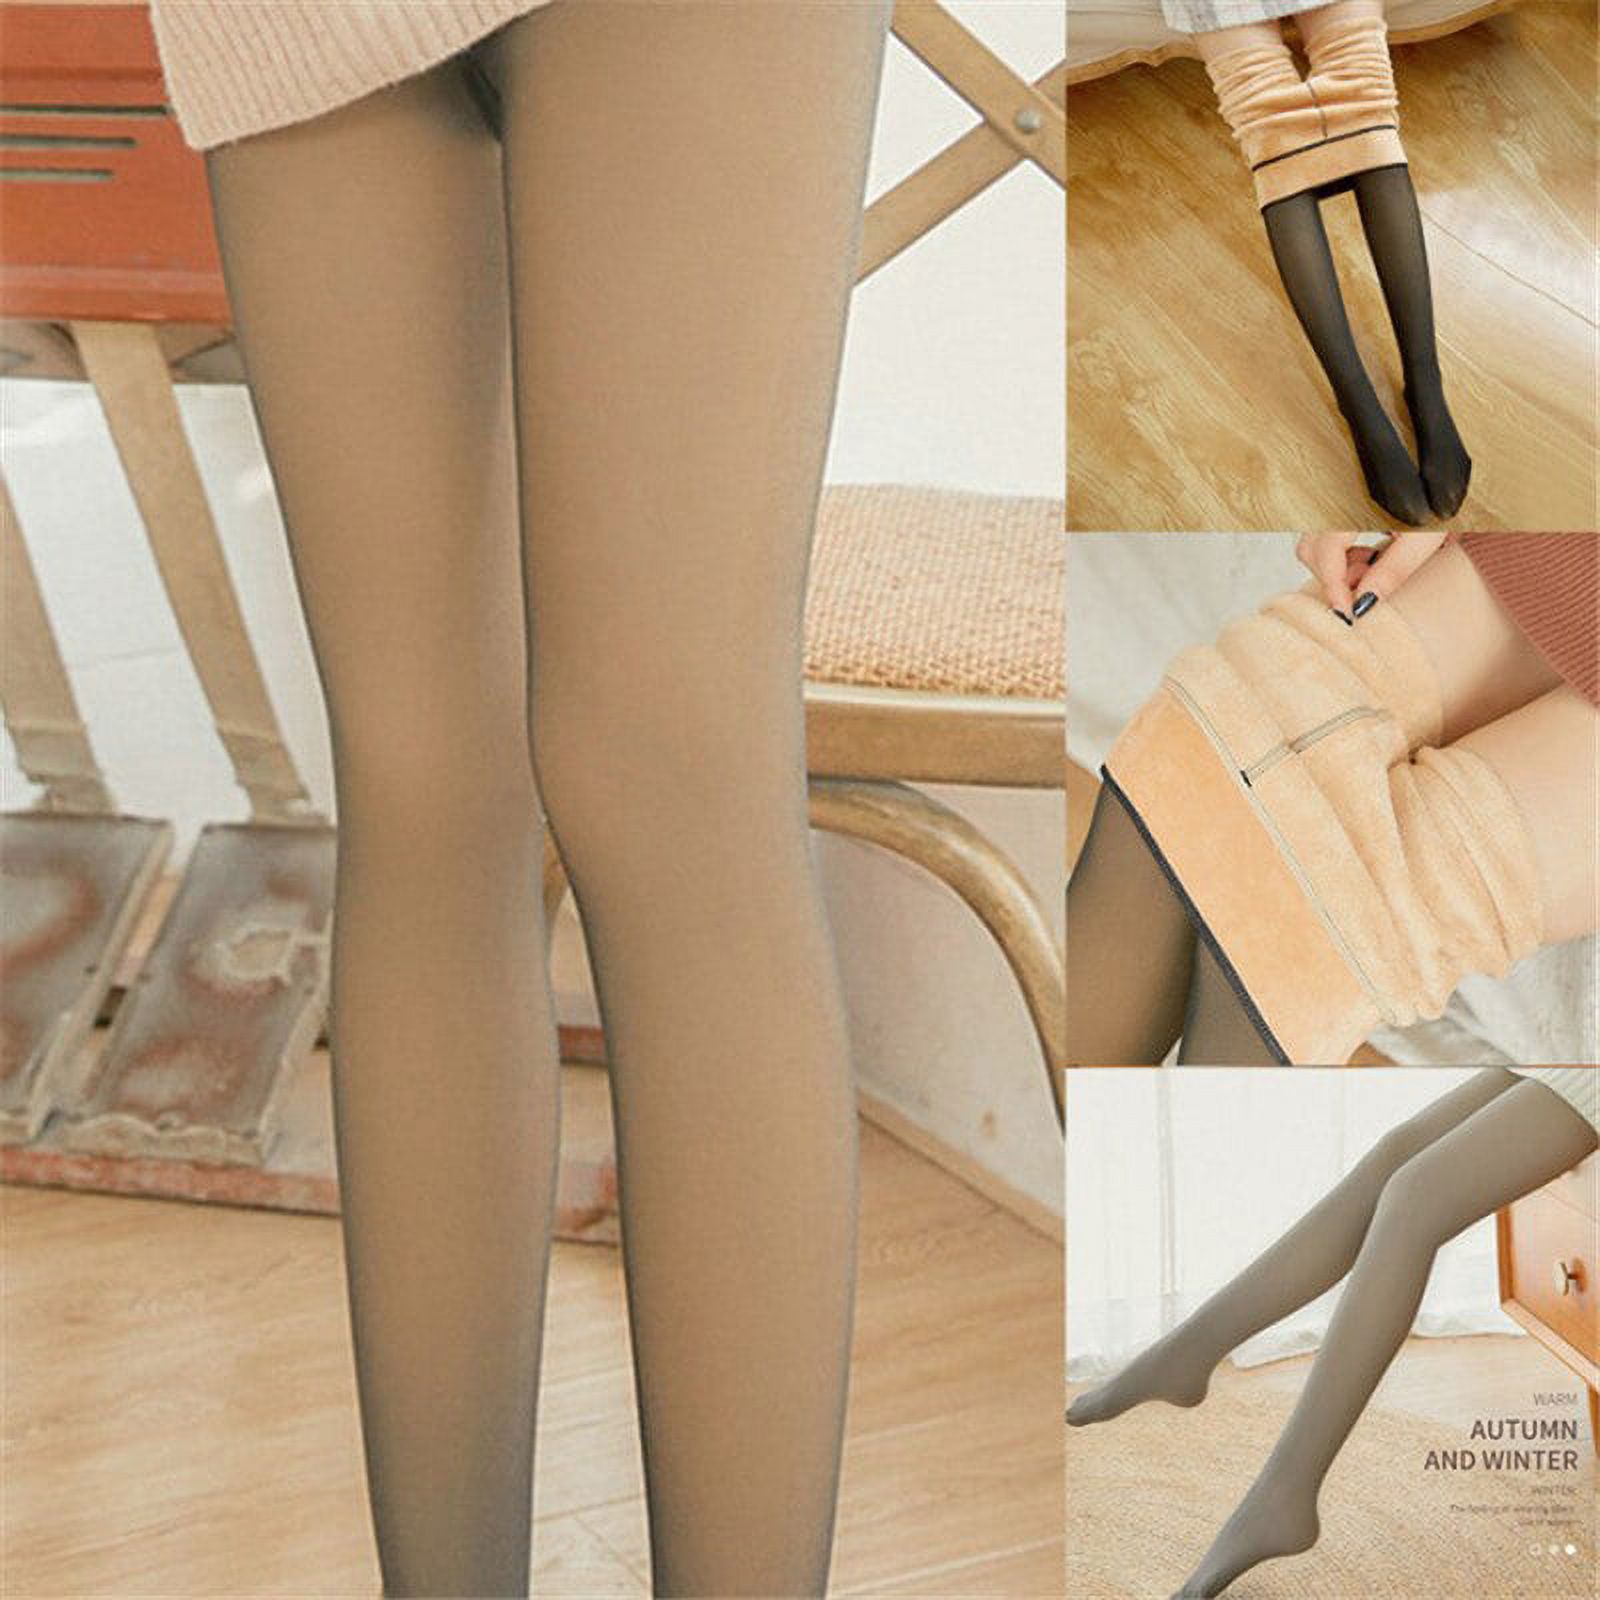 COUTEXYI Flawless Legs Fake Translucent Warm Fleece Pantyhose - image 2 of 6